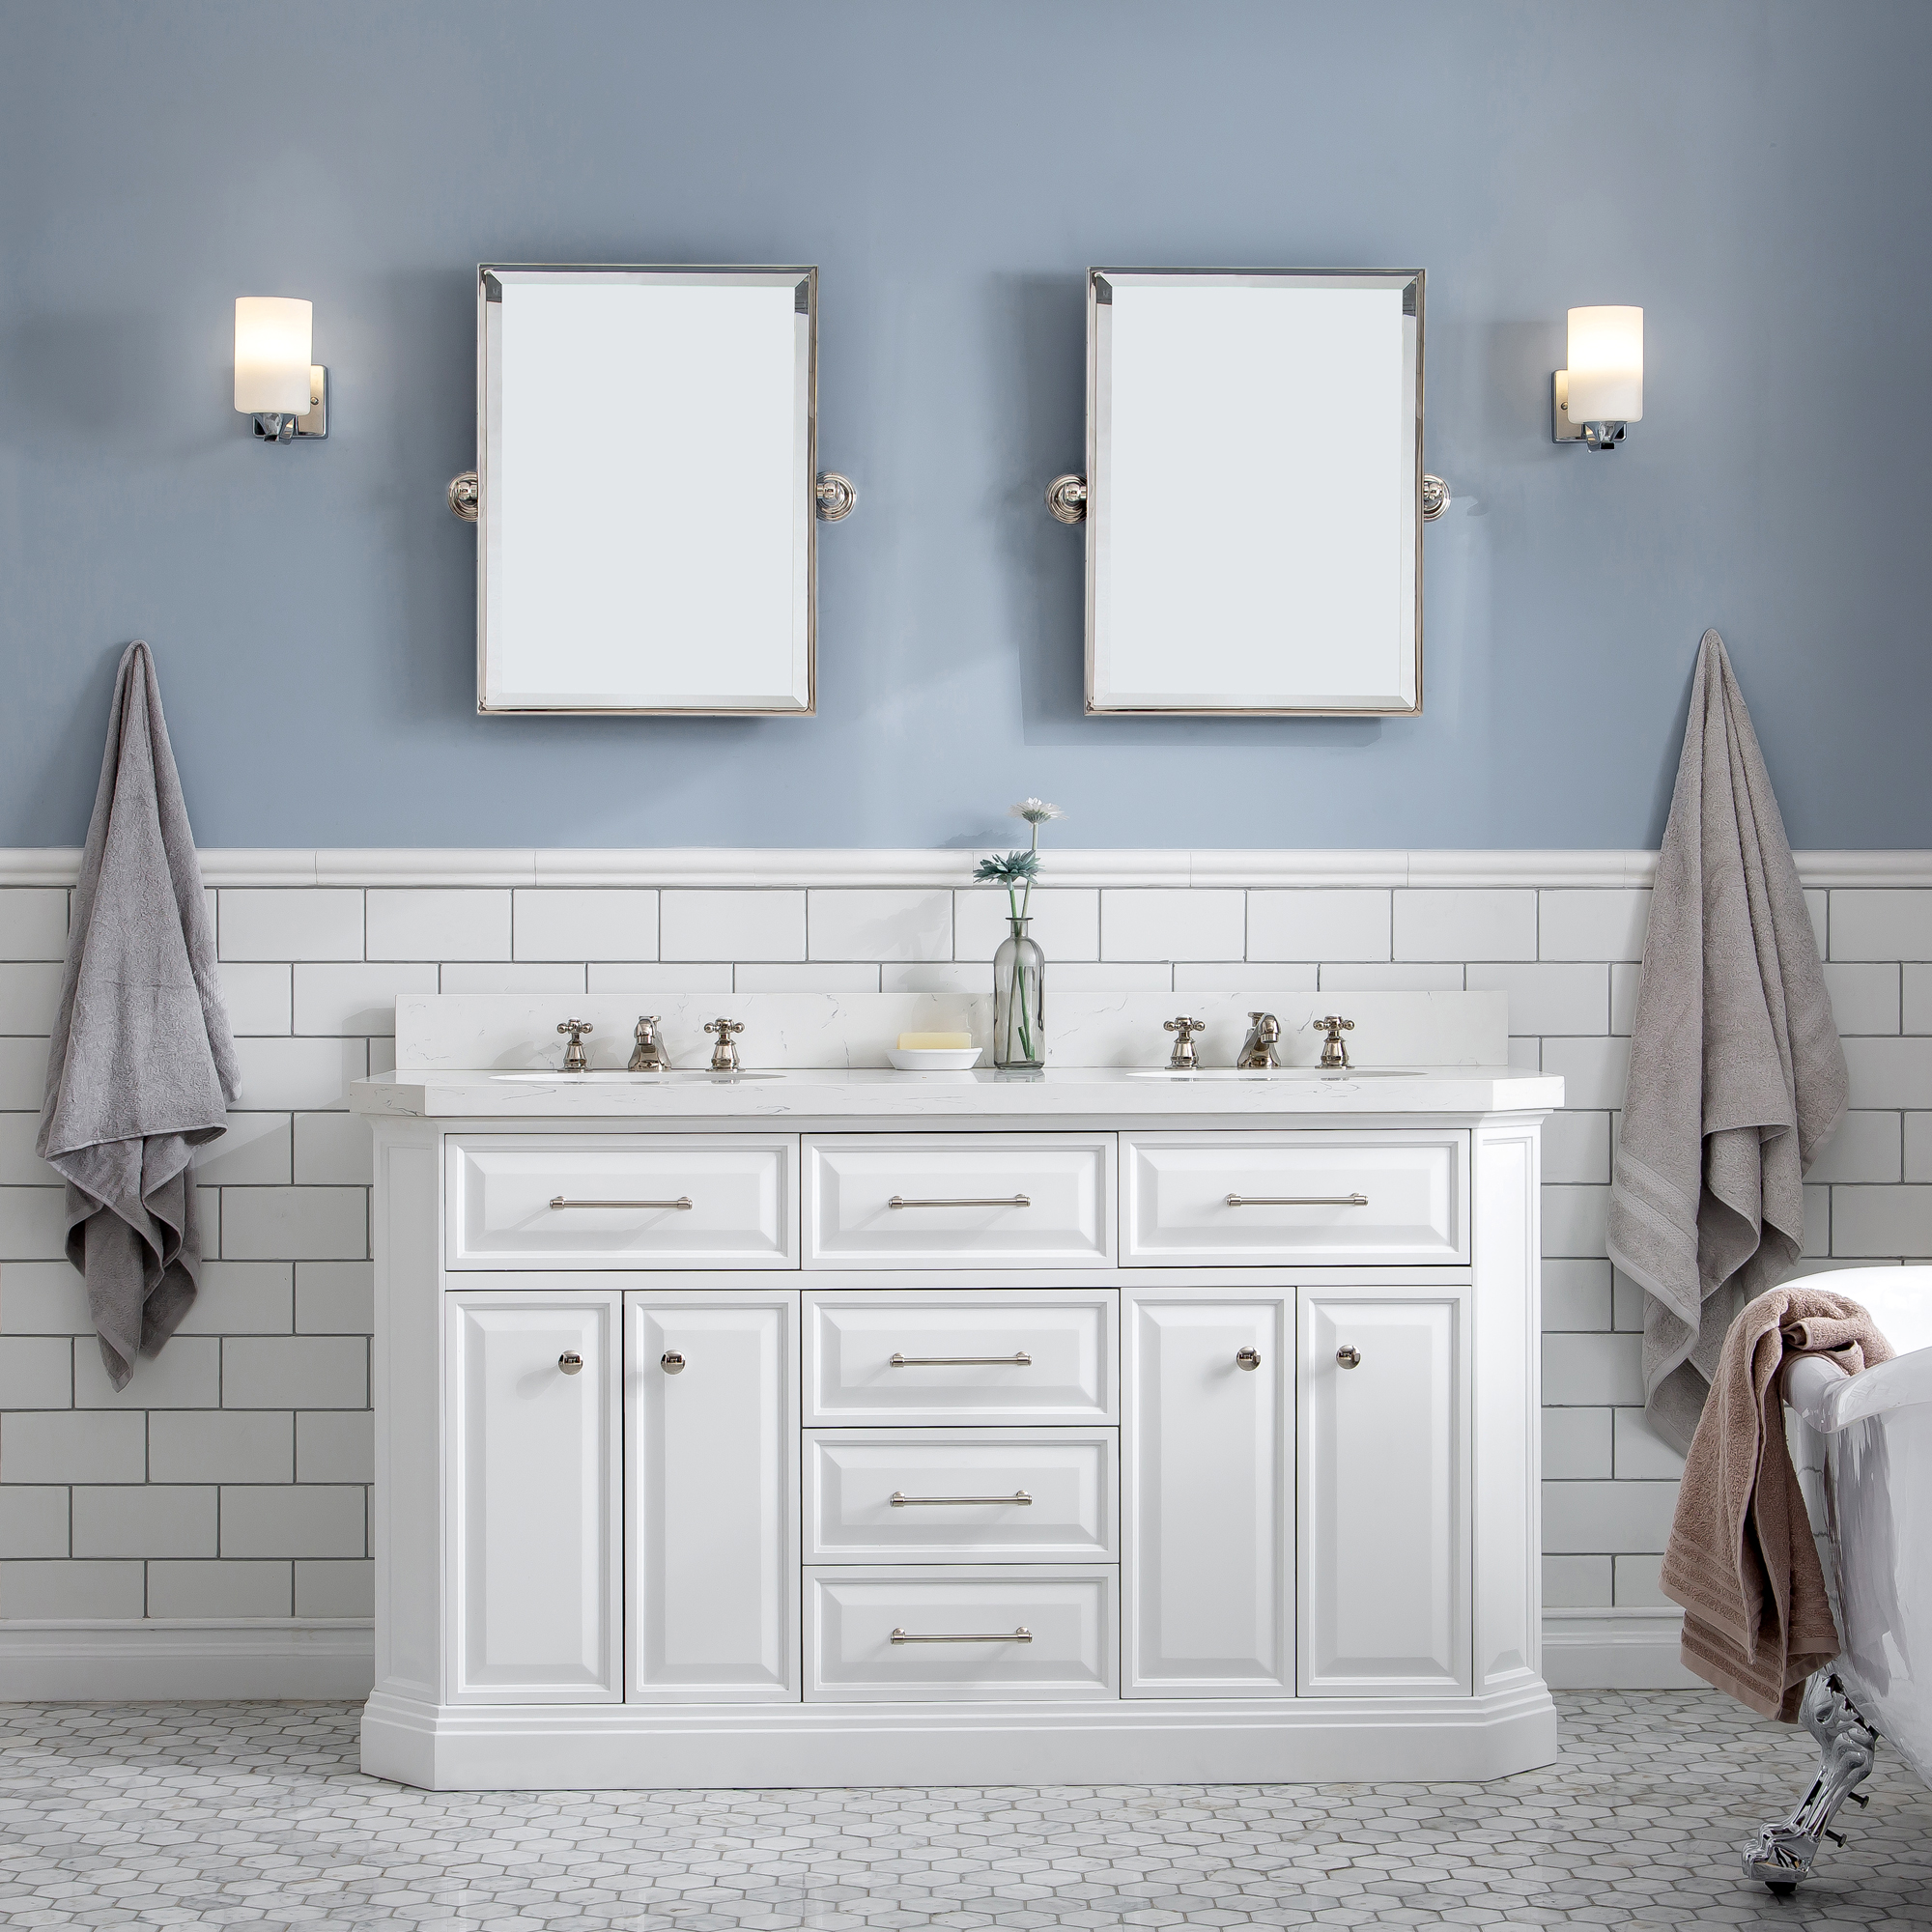 60" Traditional Collection Quartz Carrara Pure White Bathroom Vanity Set With Hardware in Polished Nickel (PVD) Finish